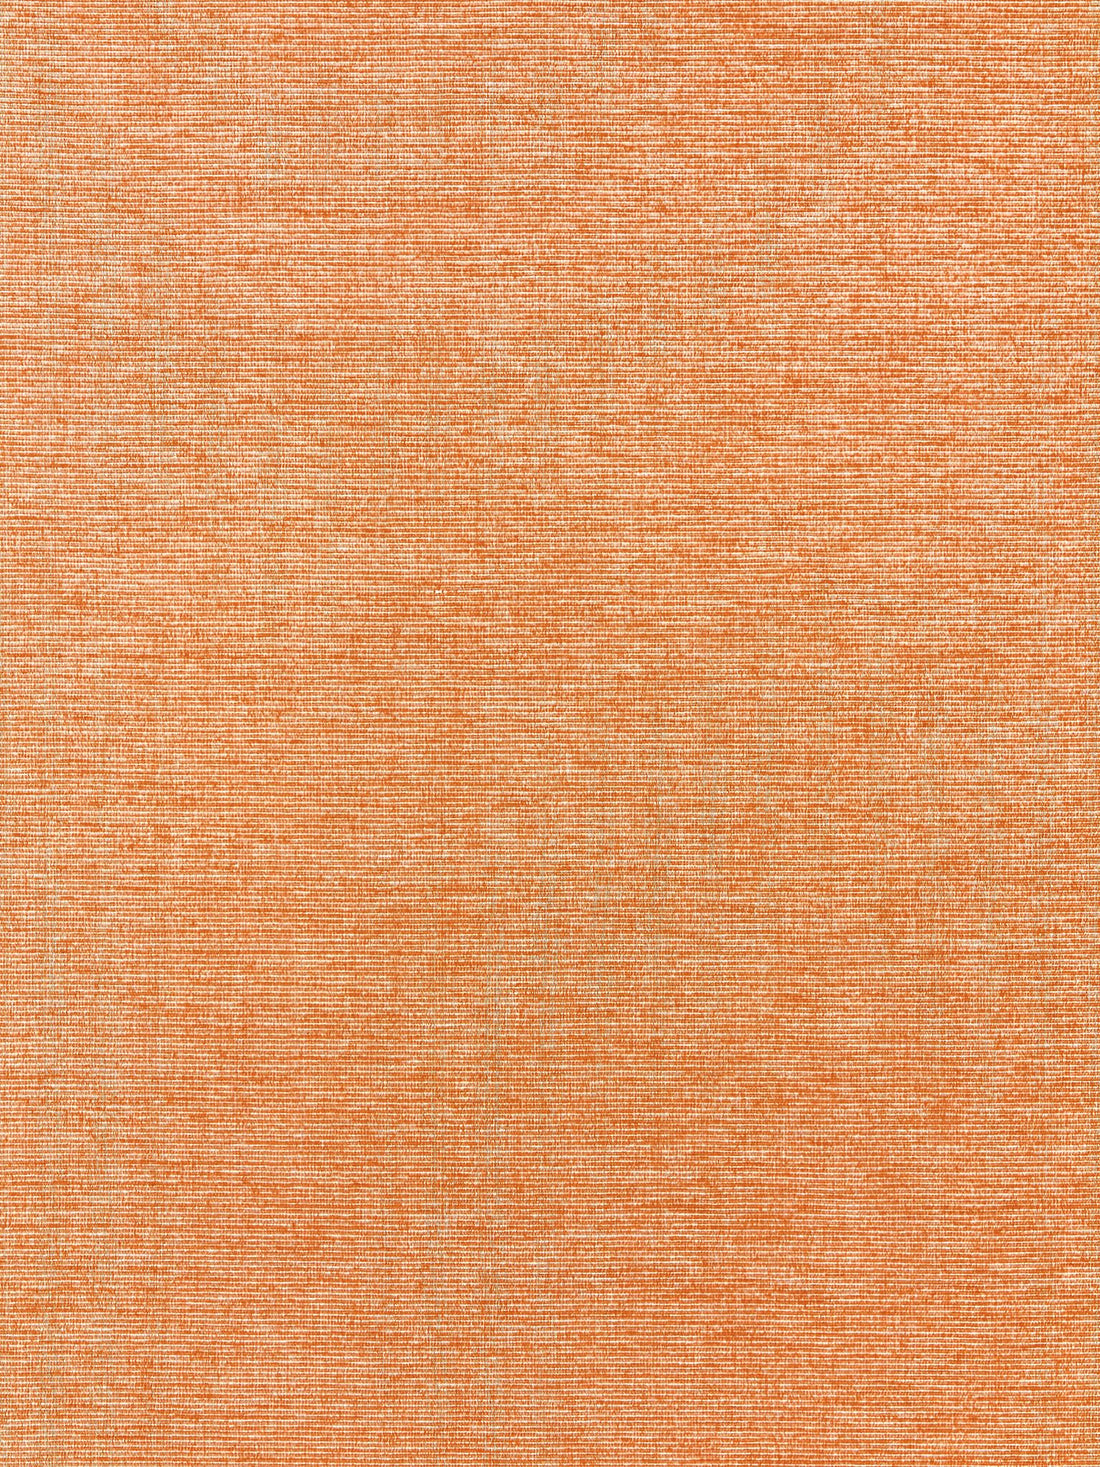 Thompson Chenille fabric in mandarin color - pattern number BK 0003K65114 - by Scalamandre in the Old World Weavers collection